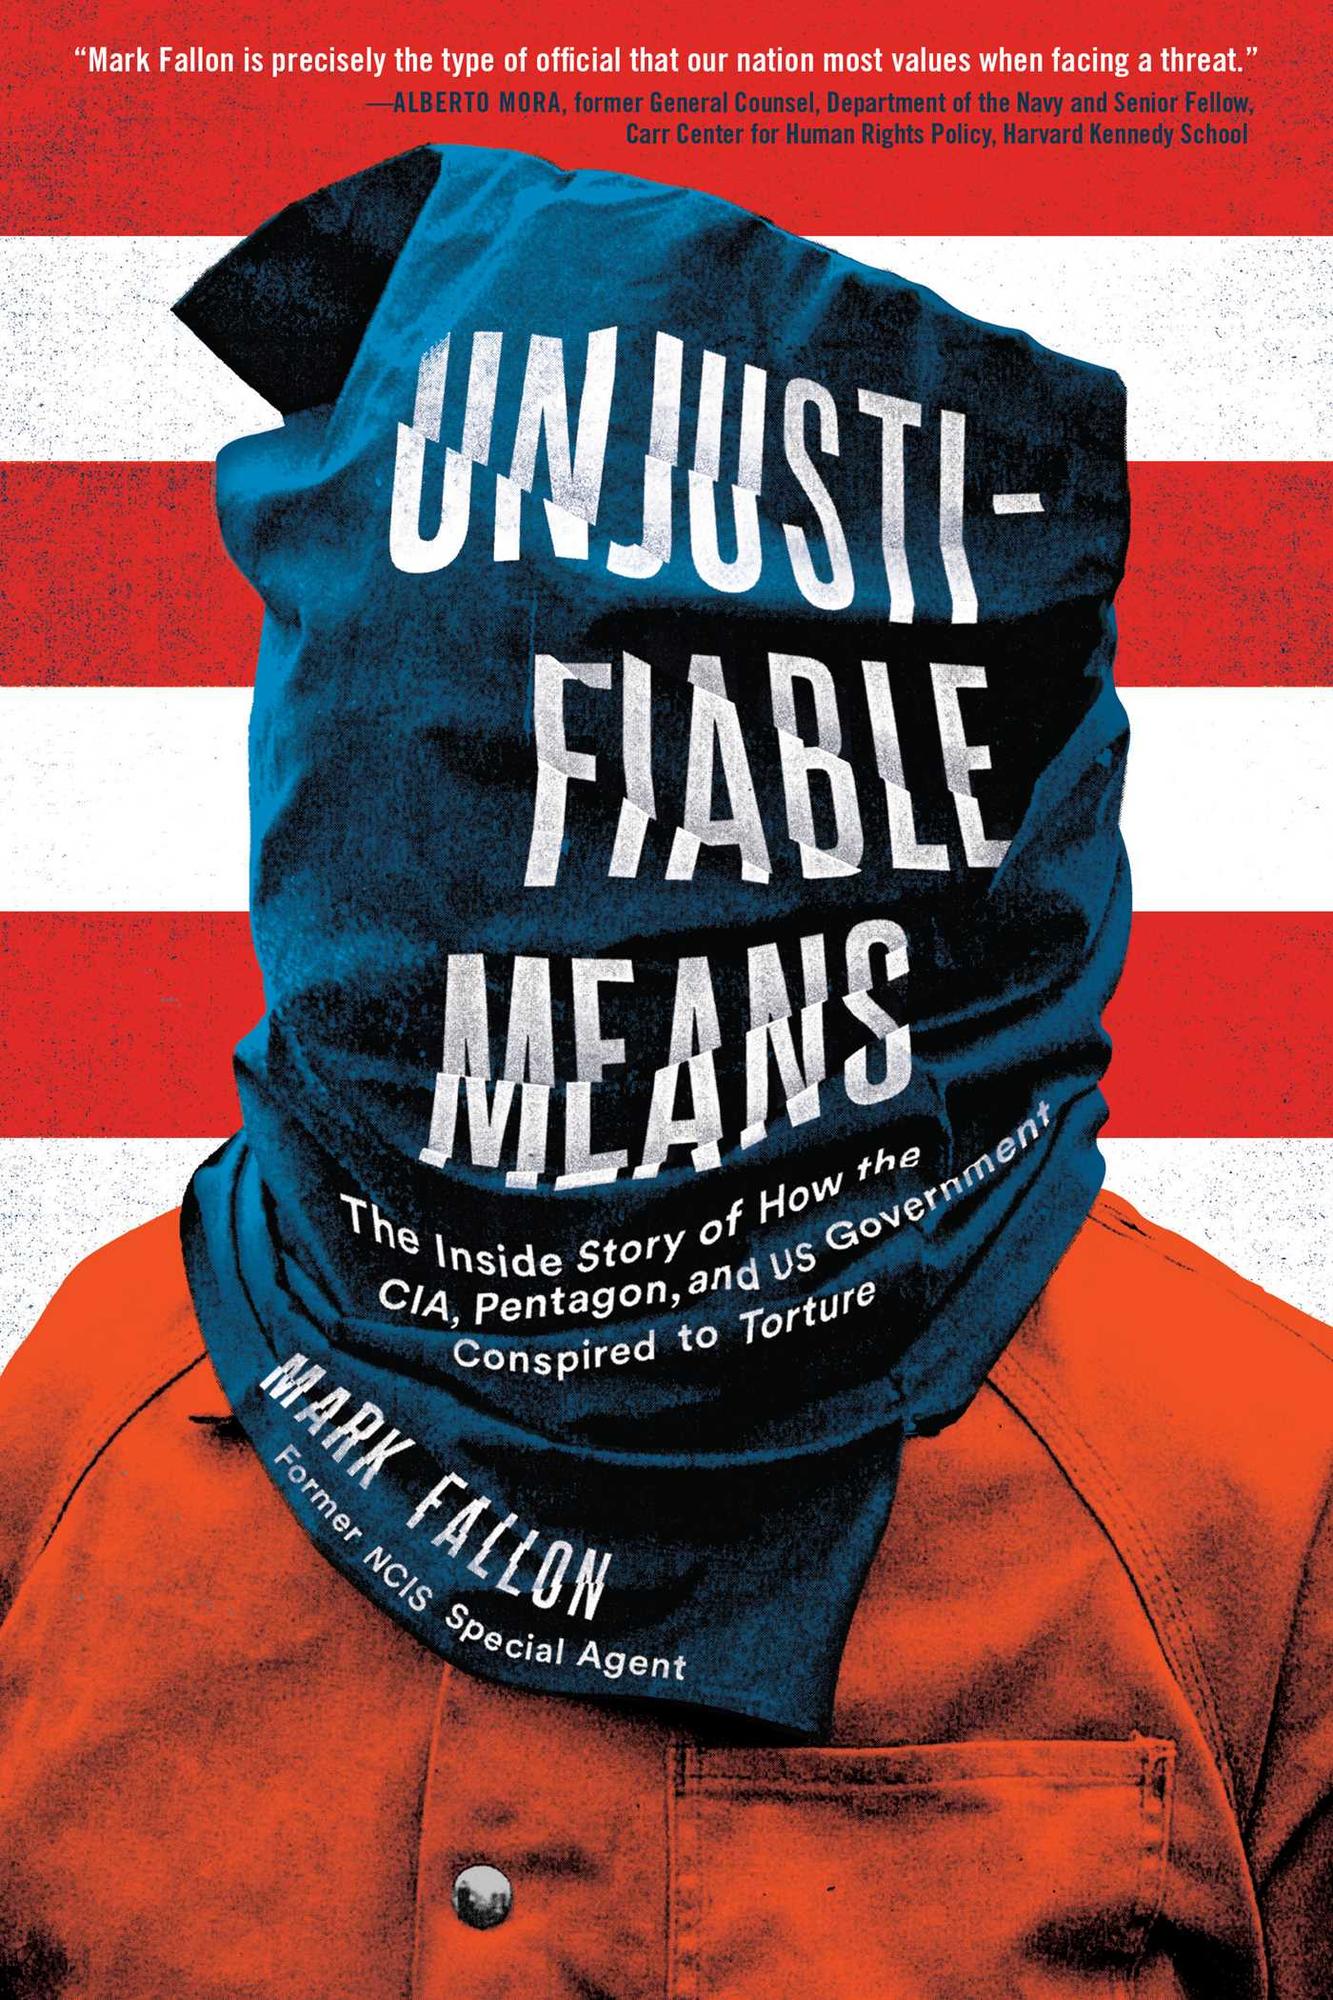 unjustifiable-meansbook